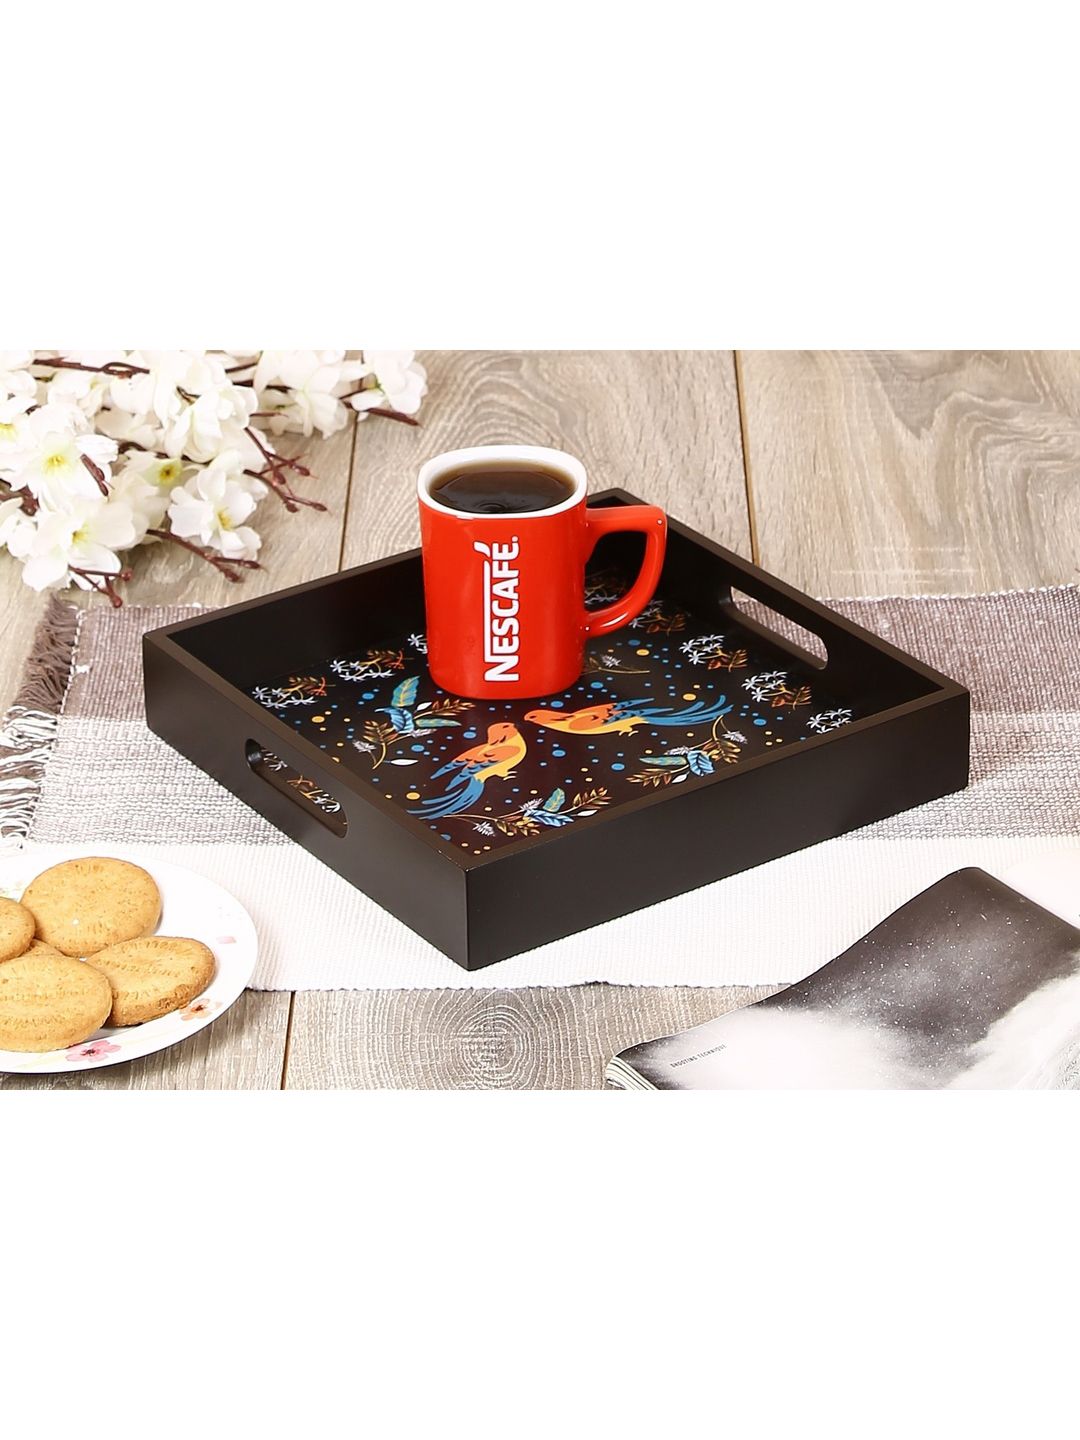 CRAYTON Black & Blue Printed Small Square Tray Price in India